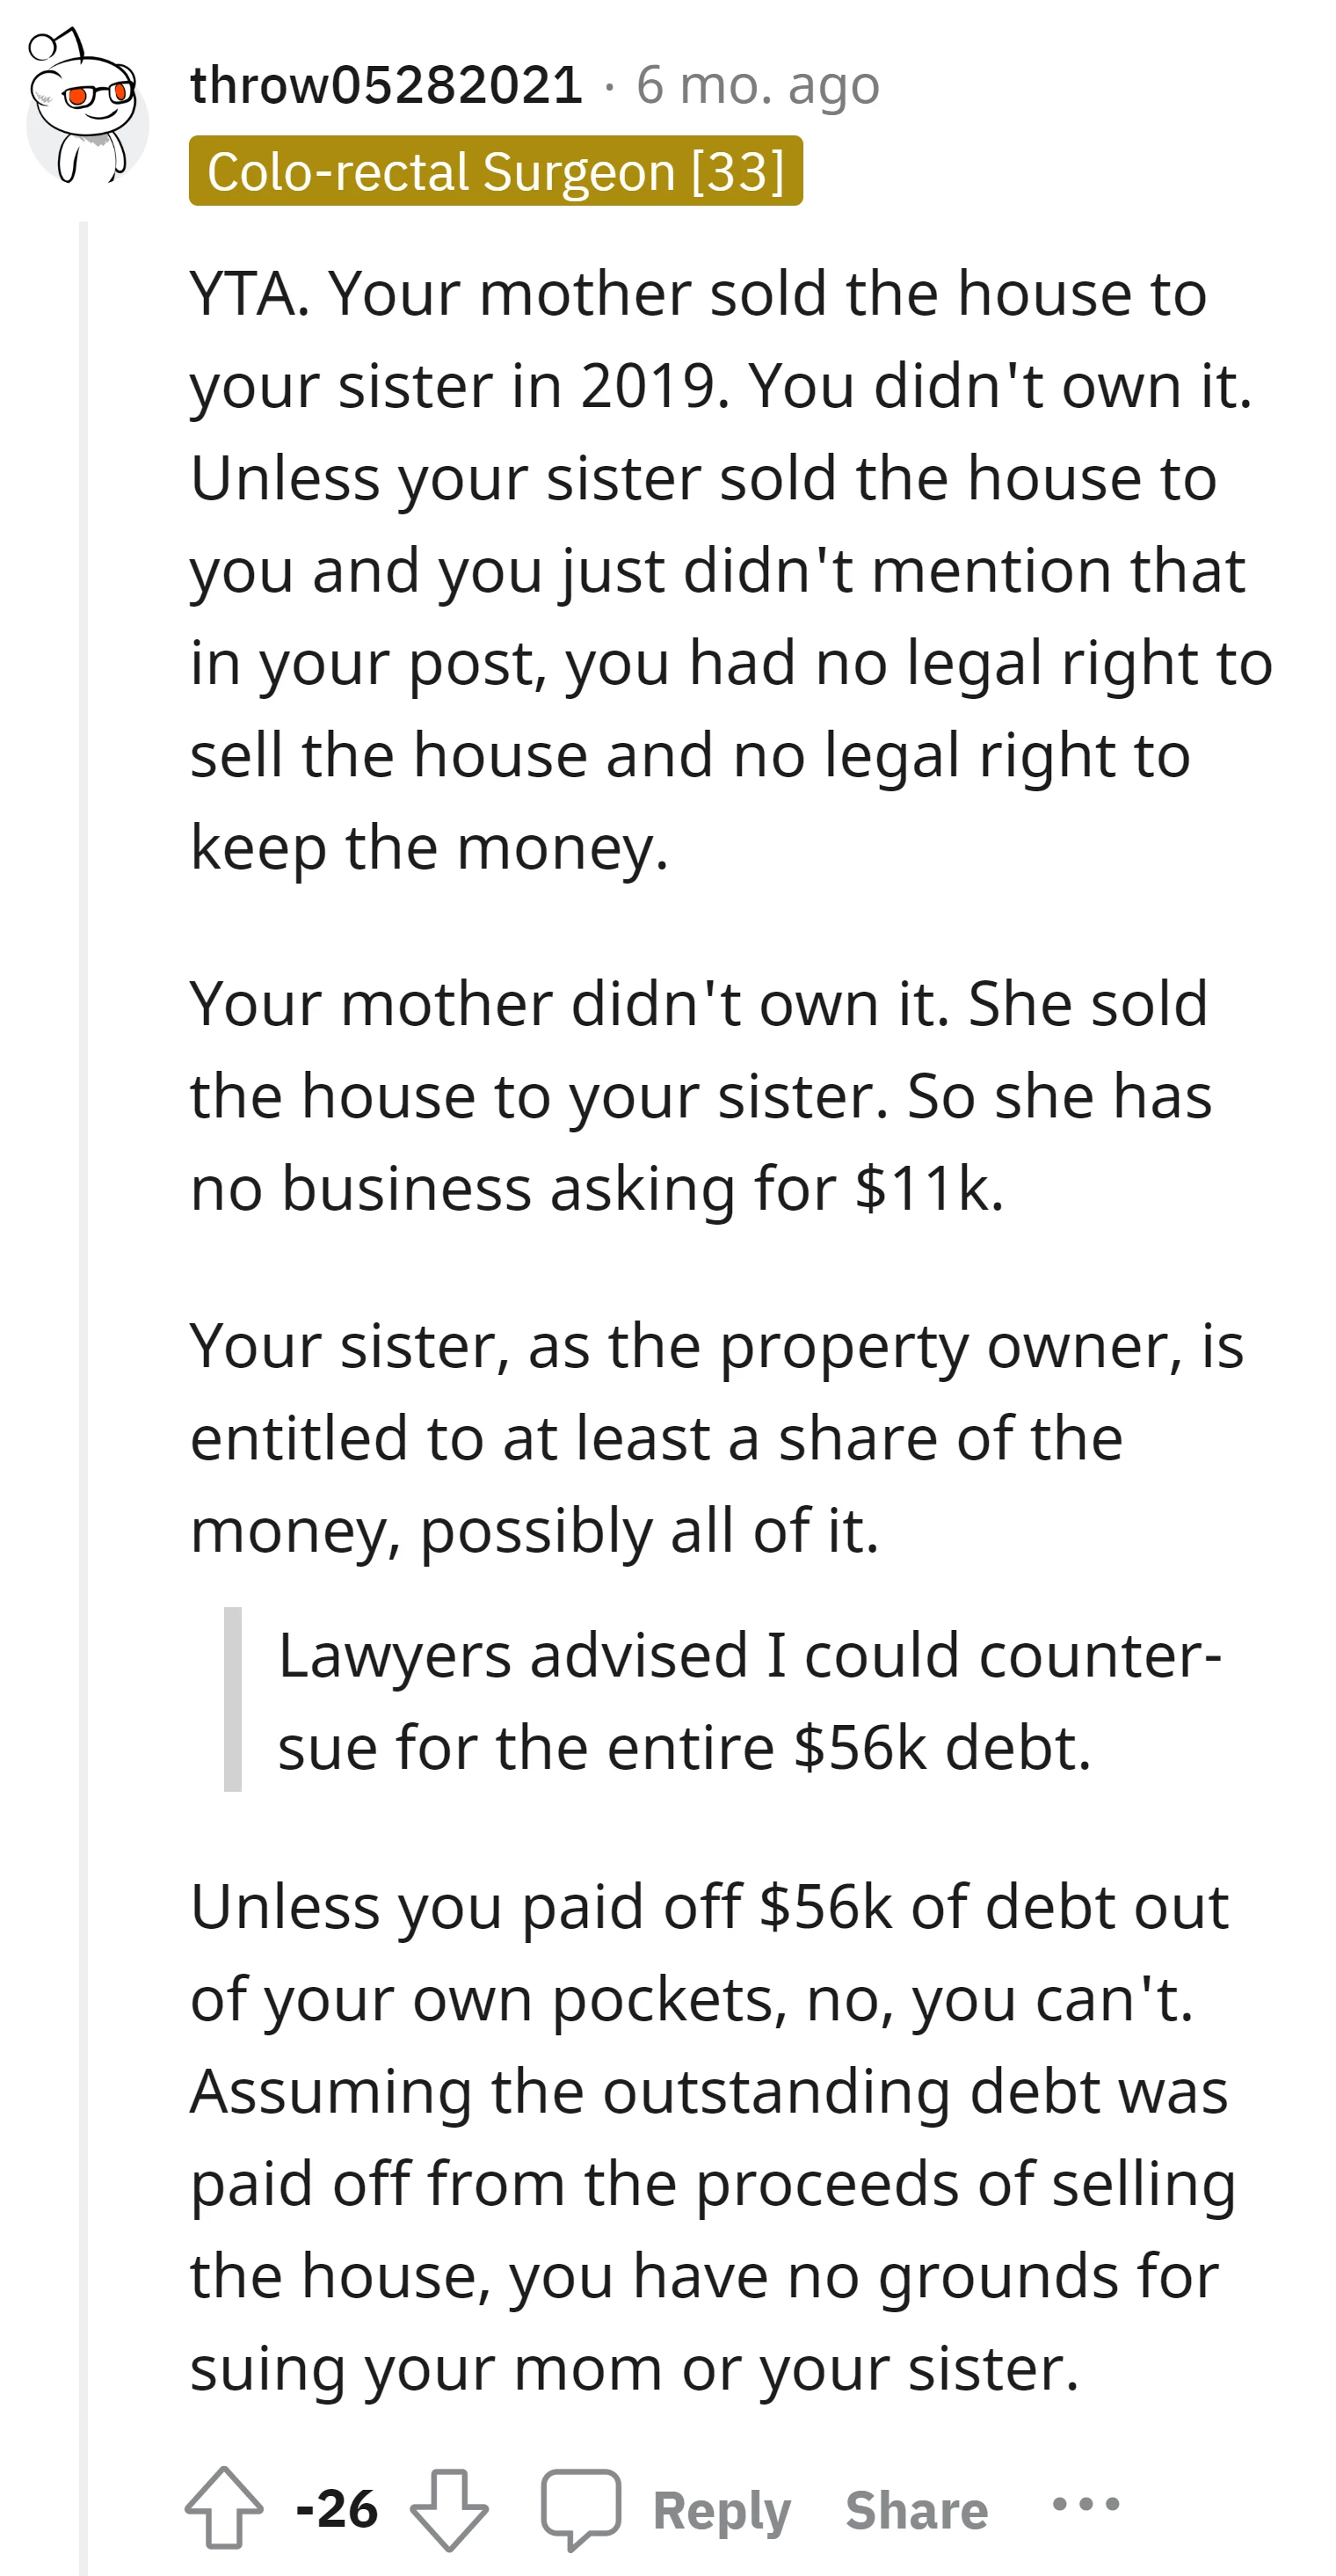 OP had no legal right to sell the house since it was sold to their sister